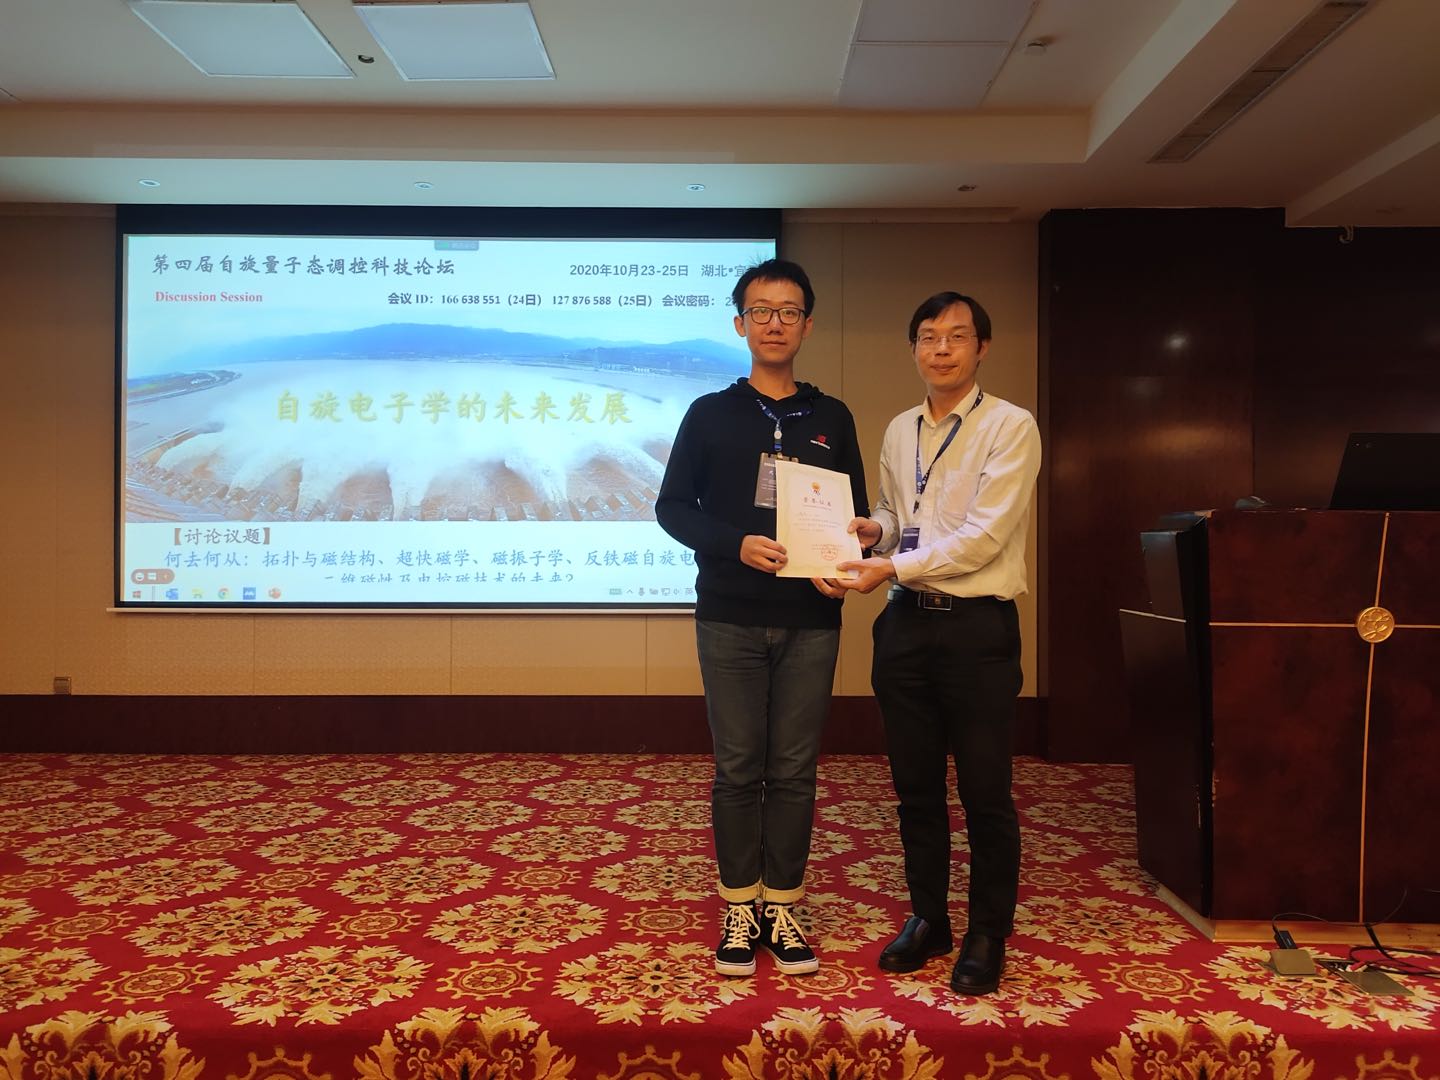 Le Zhao is Awarded 'Best Poster' Prize in the Spin-Quantum State Modulation Science and Technology Forum